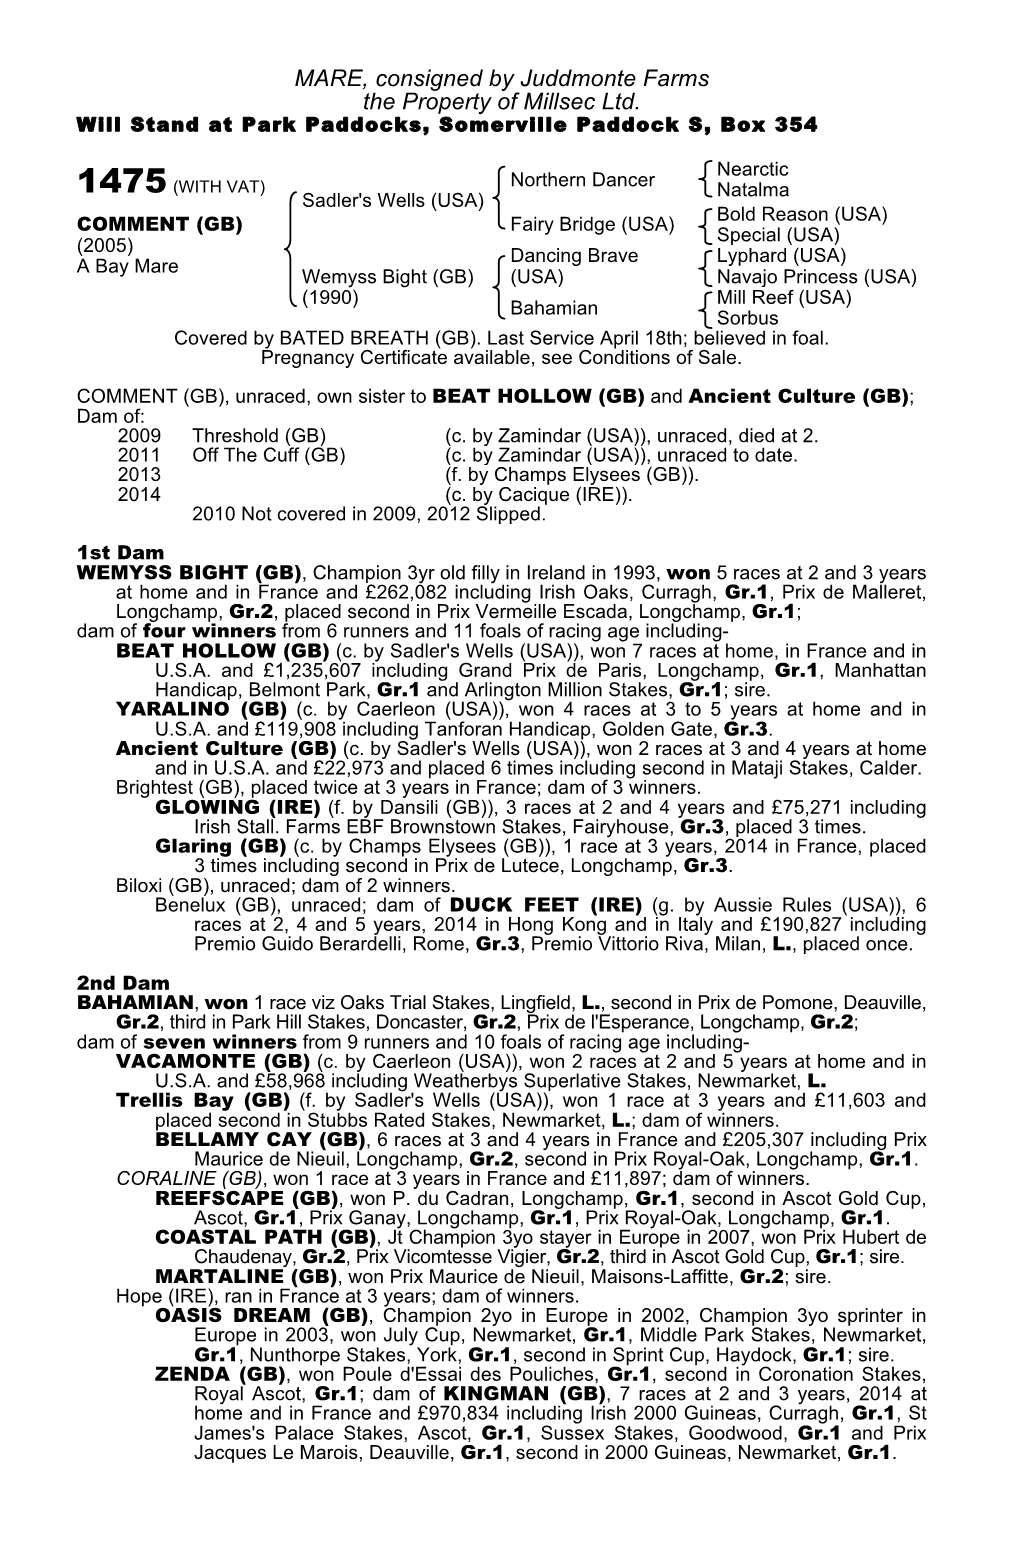 MARE, Consigned by Juddmonte Farms the Property of Millsec Ltd. Will Stand at Park Paddocks, Somerville Paddock S, Box 354